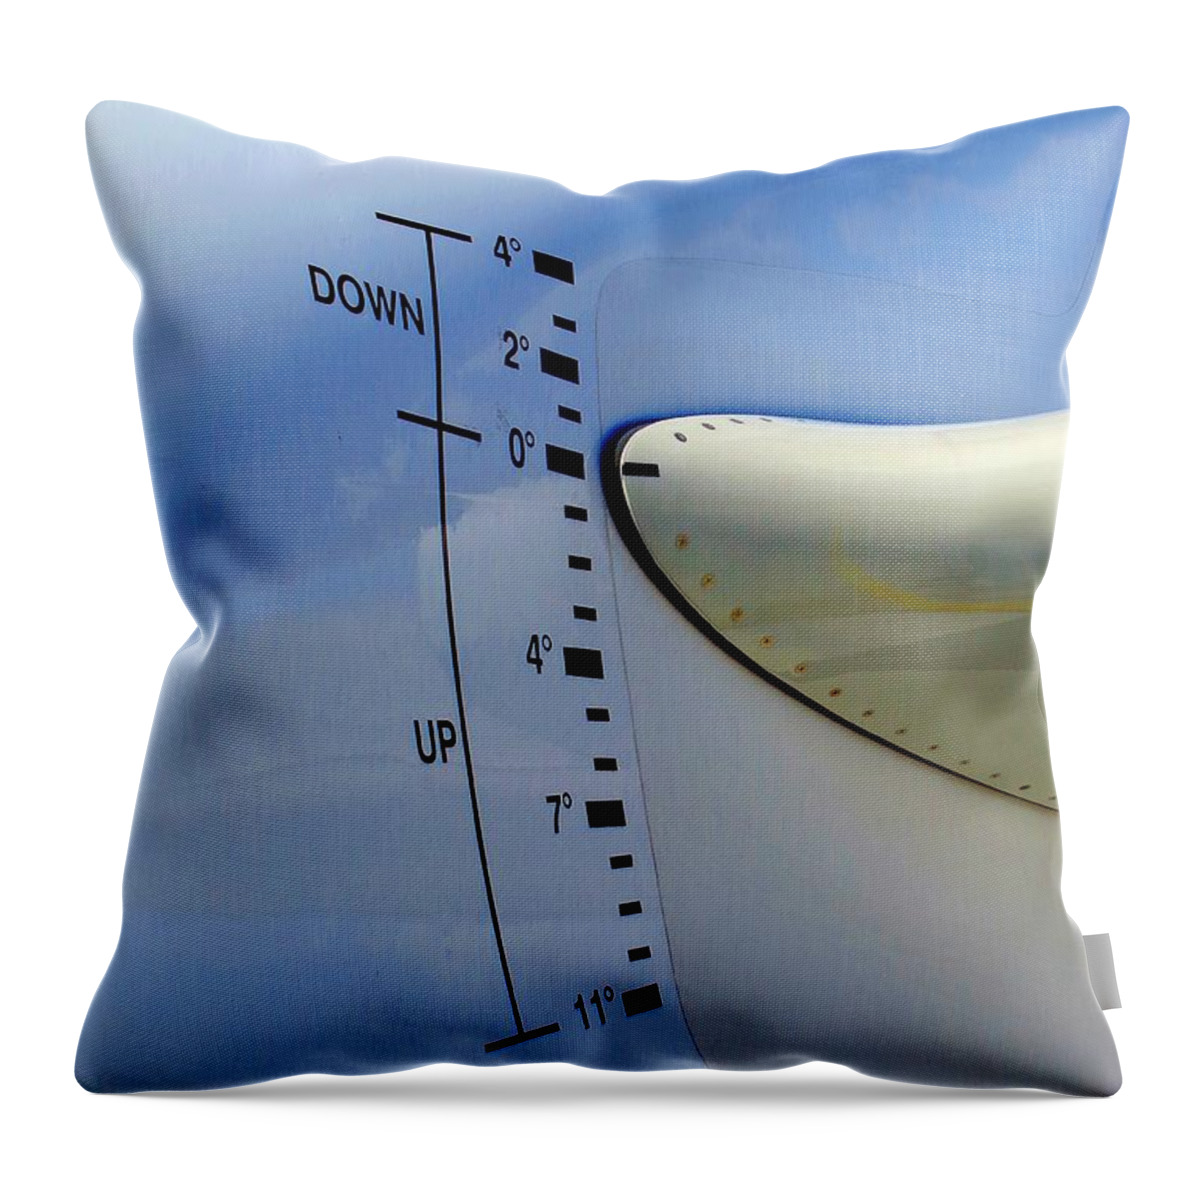 Trimmbare Höhenflosse Throw Pillow featuring the photograph Pendelruder / Trim Tab by Thomas Schroeder